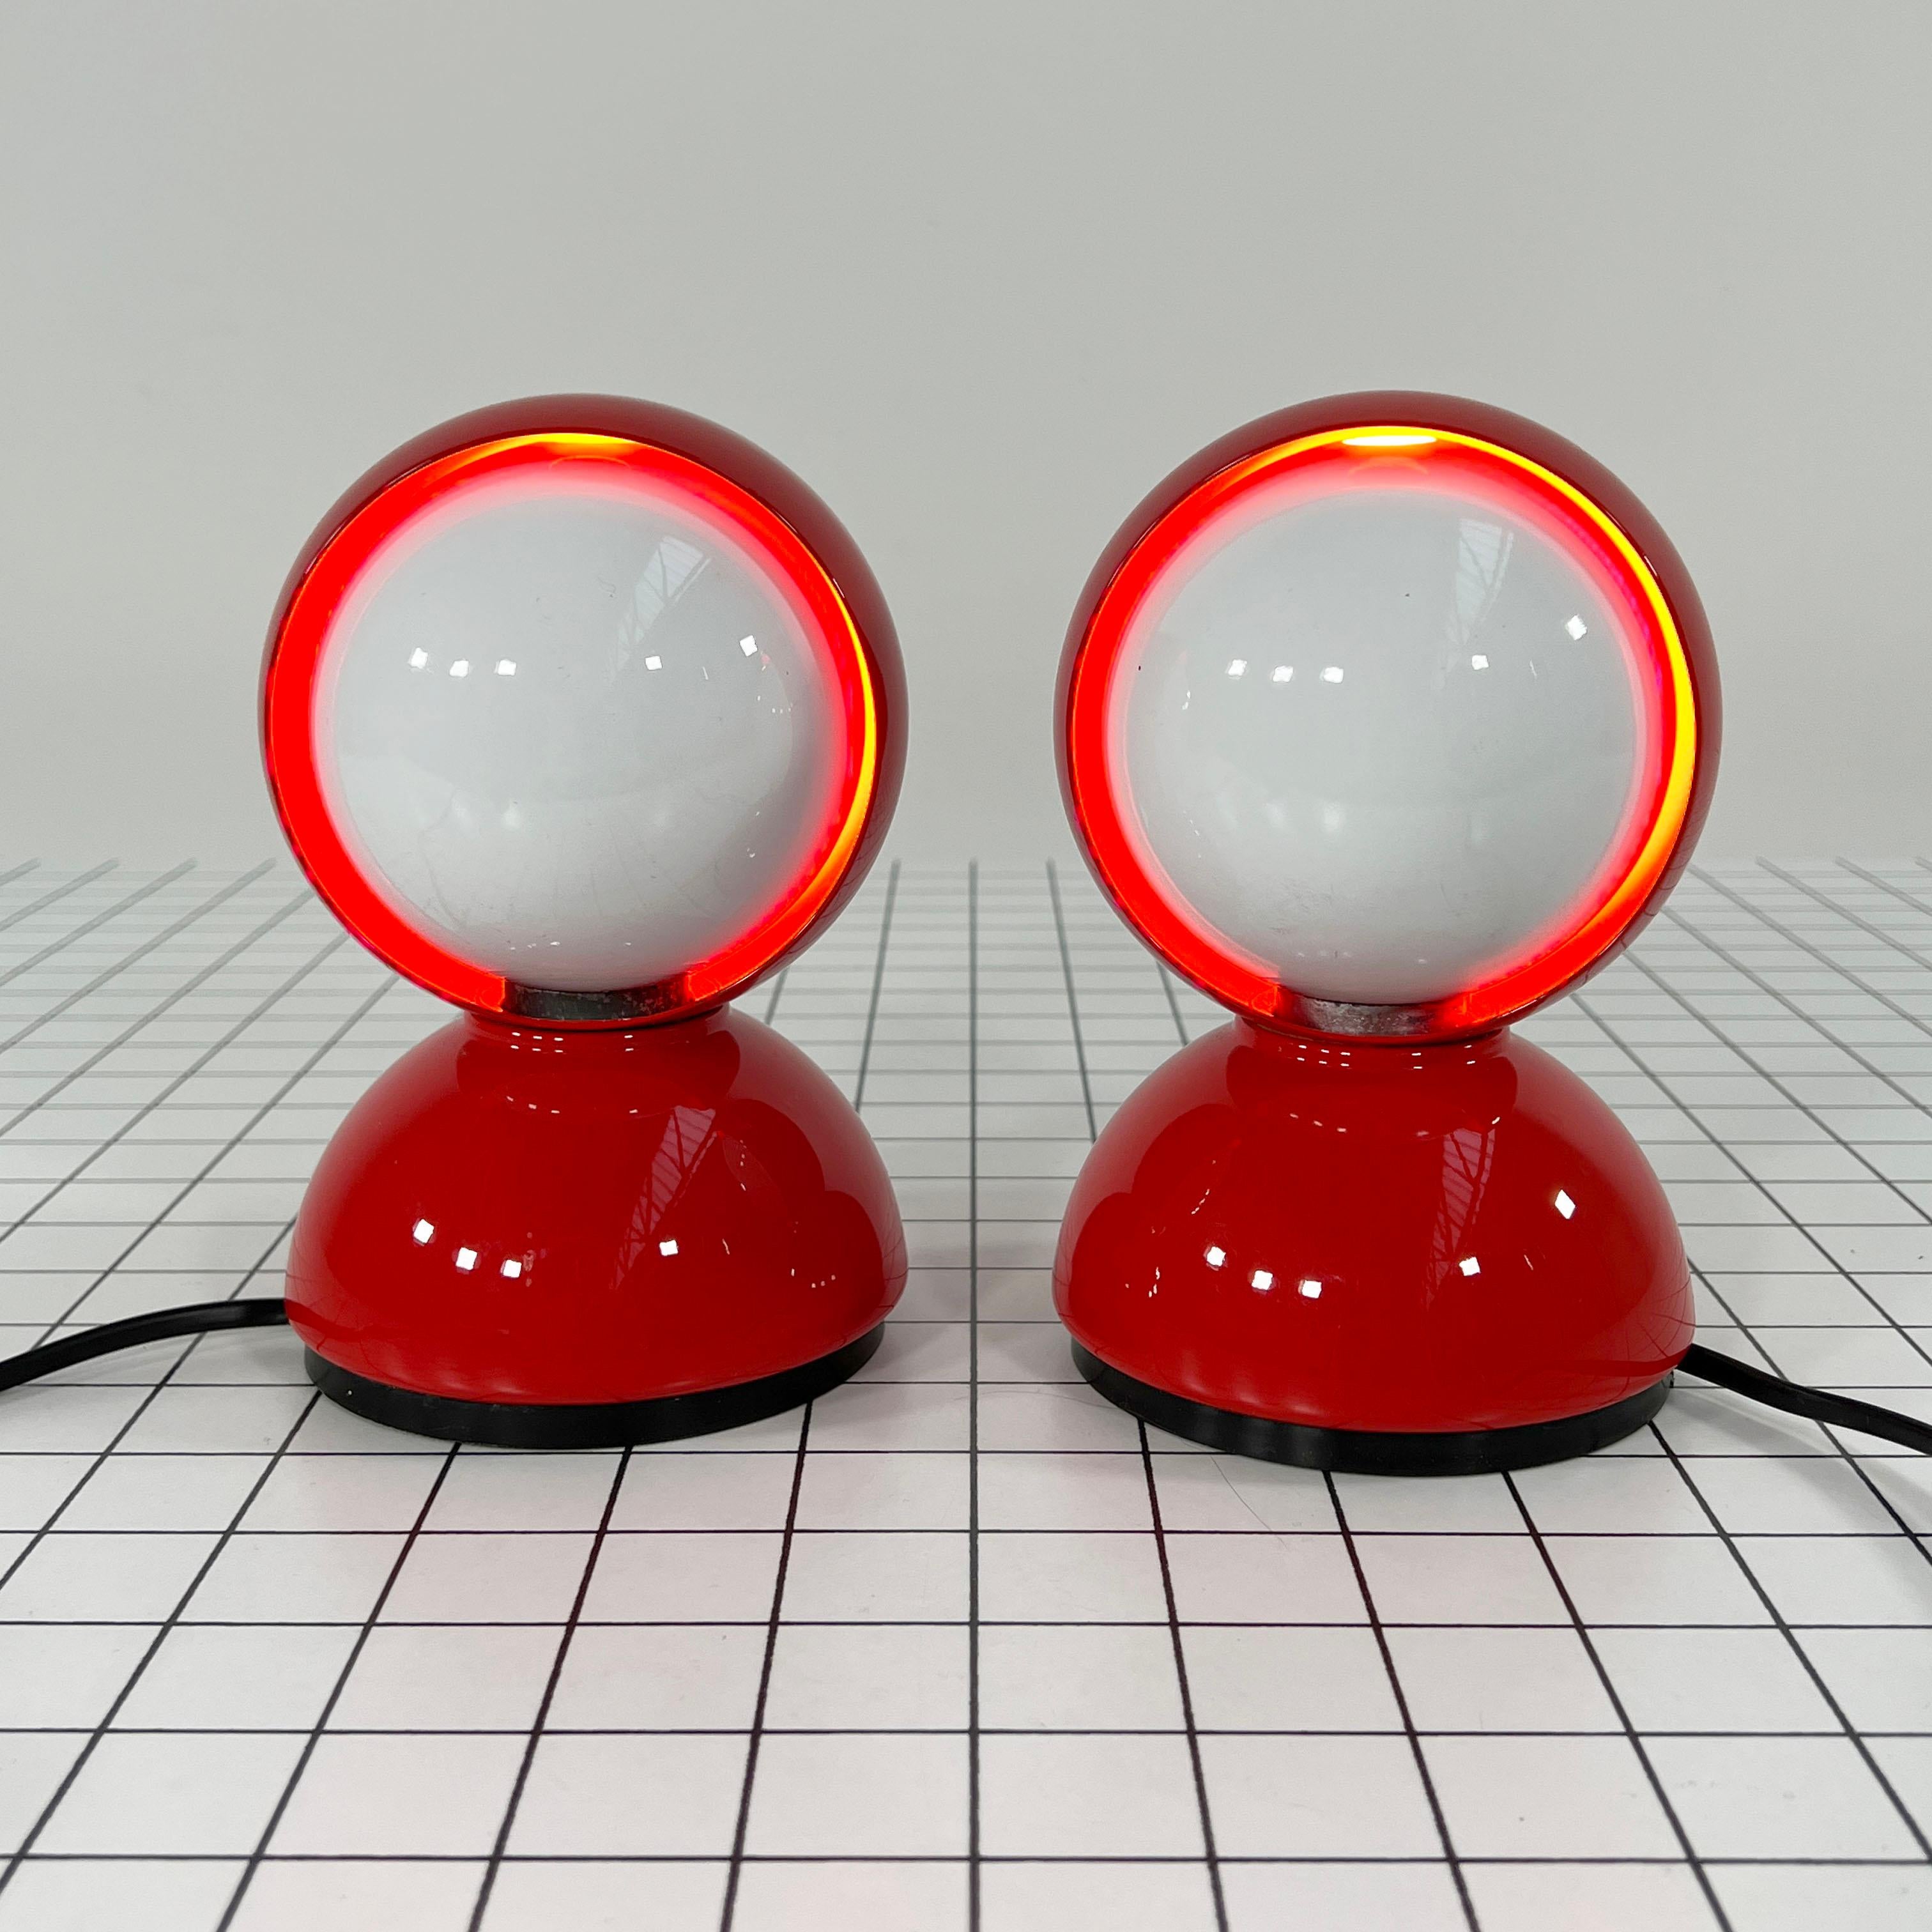 Pair of Red Eclisse table lamps by Vico Magistretti for Artemide, 1960s
Designer - Vico Magistretti
Producer - Artemide
Model - Eclisse table lamp
Design Period - Sixties
Measurements - Width 12 cm x Depth 12 cm x Height 18,5 cm
Materials -